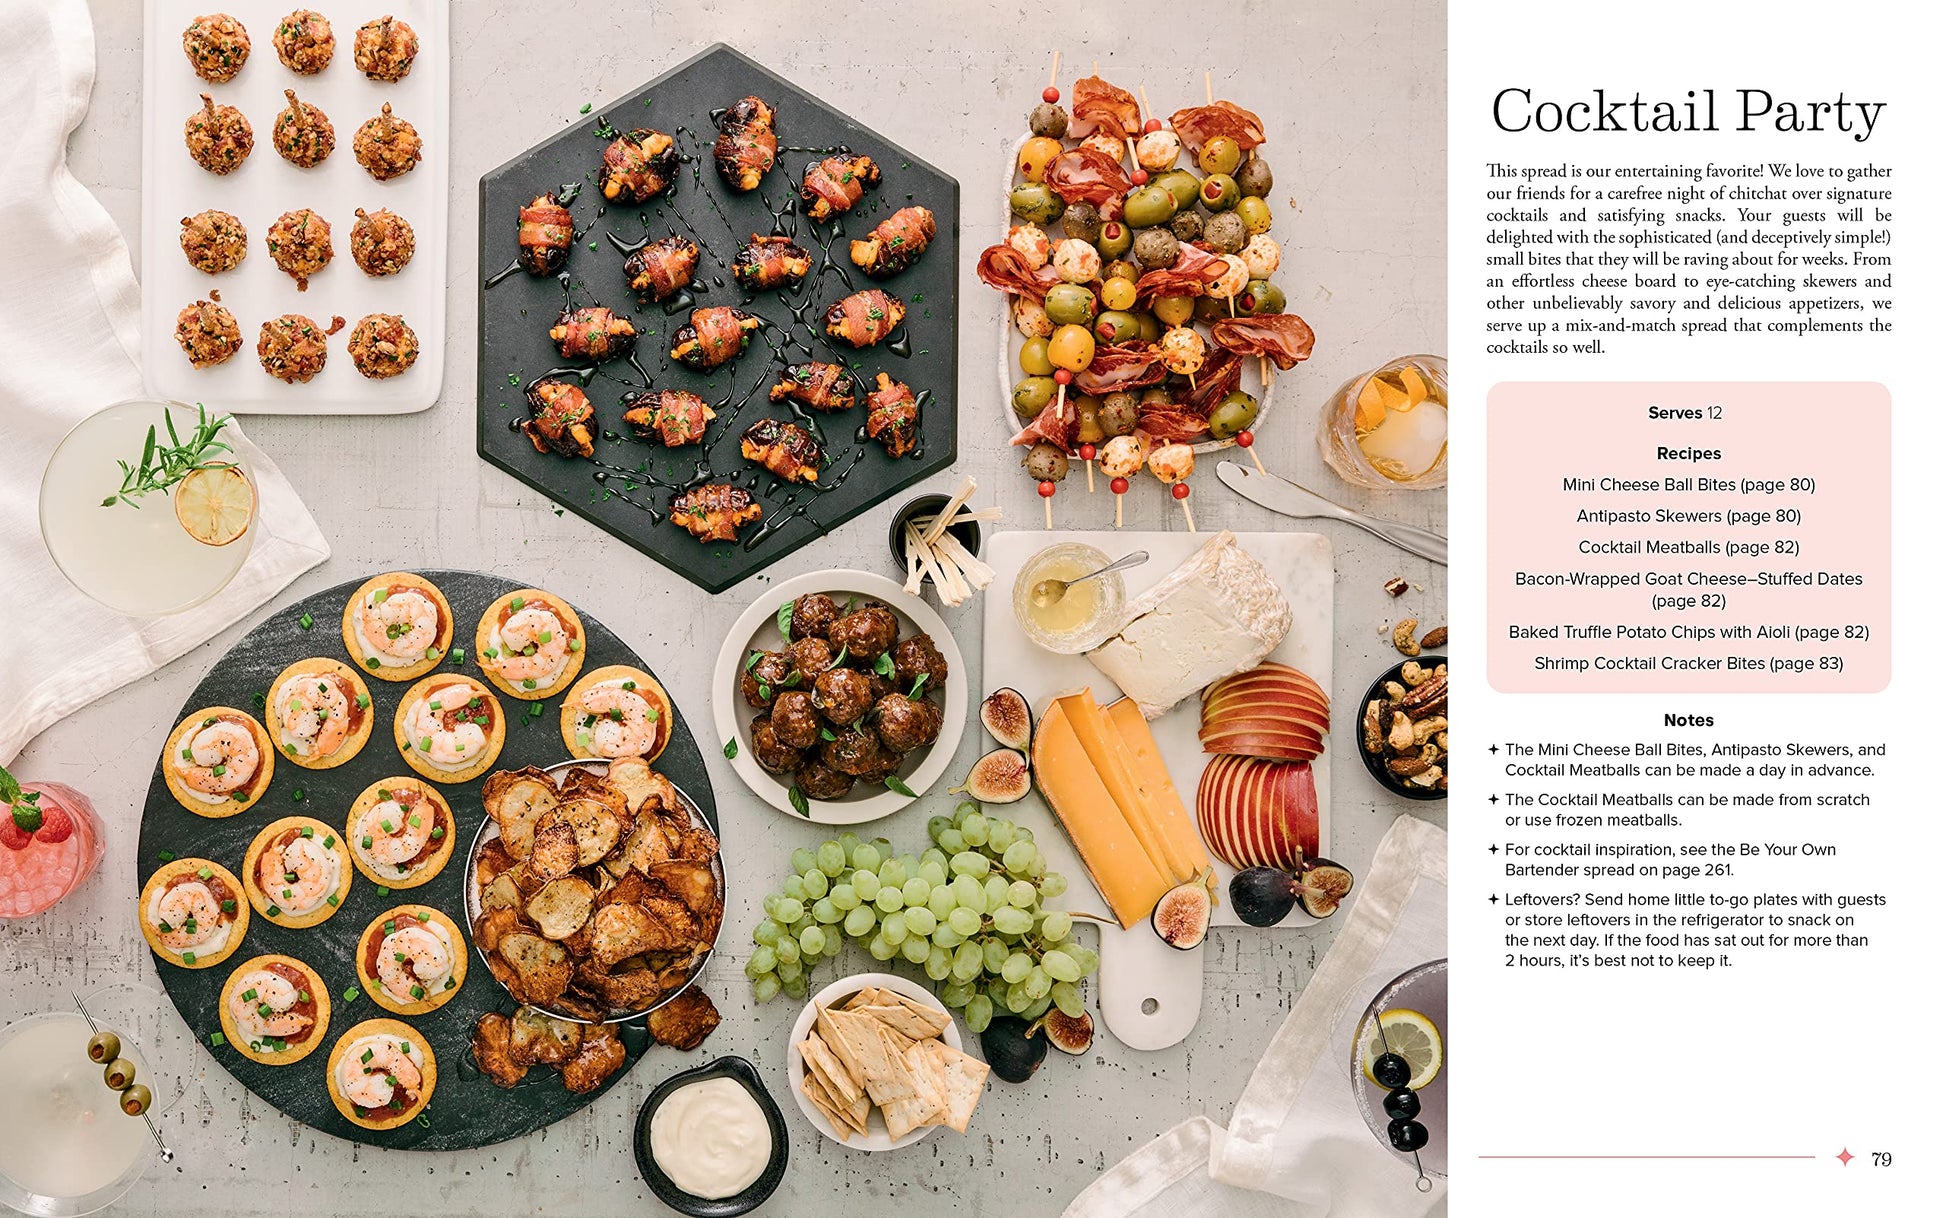 fourth set of pages has picture of cocktail party spread and text